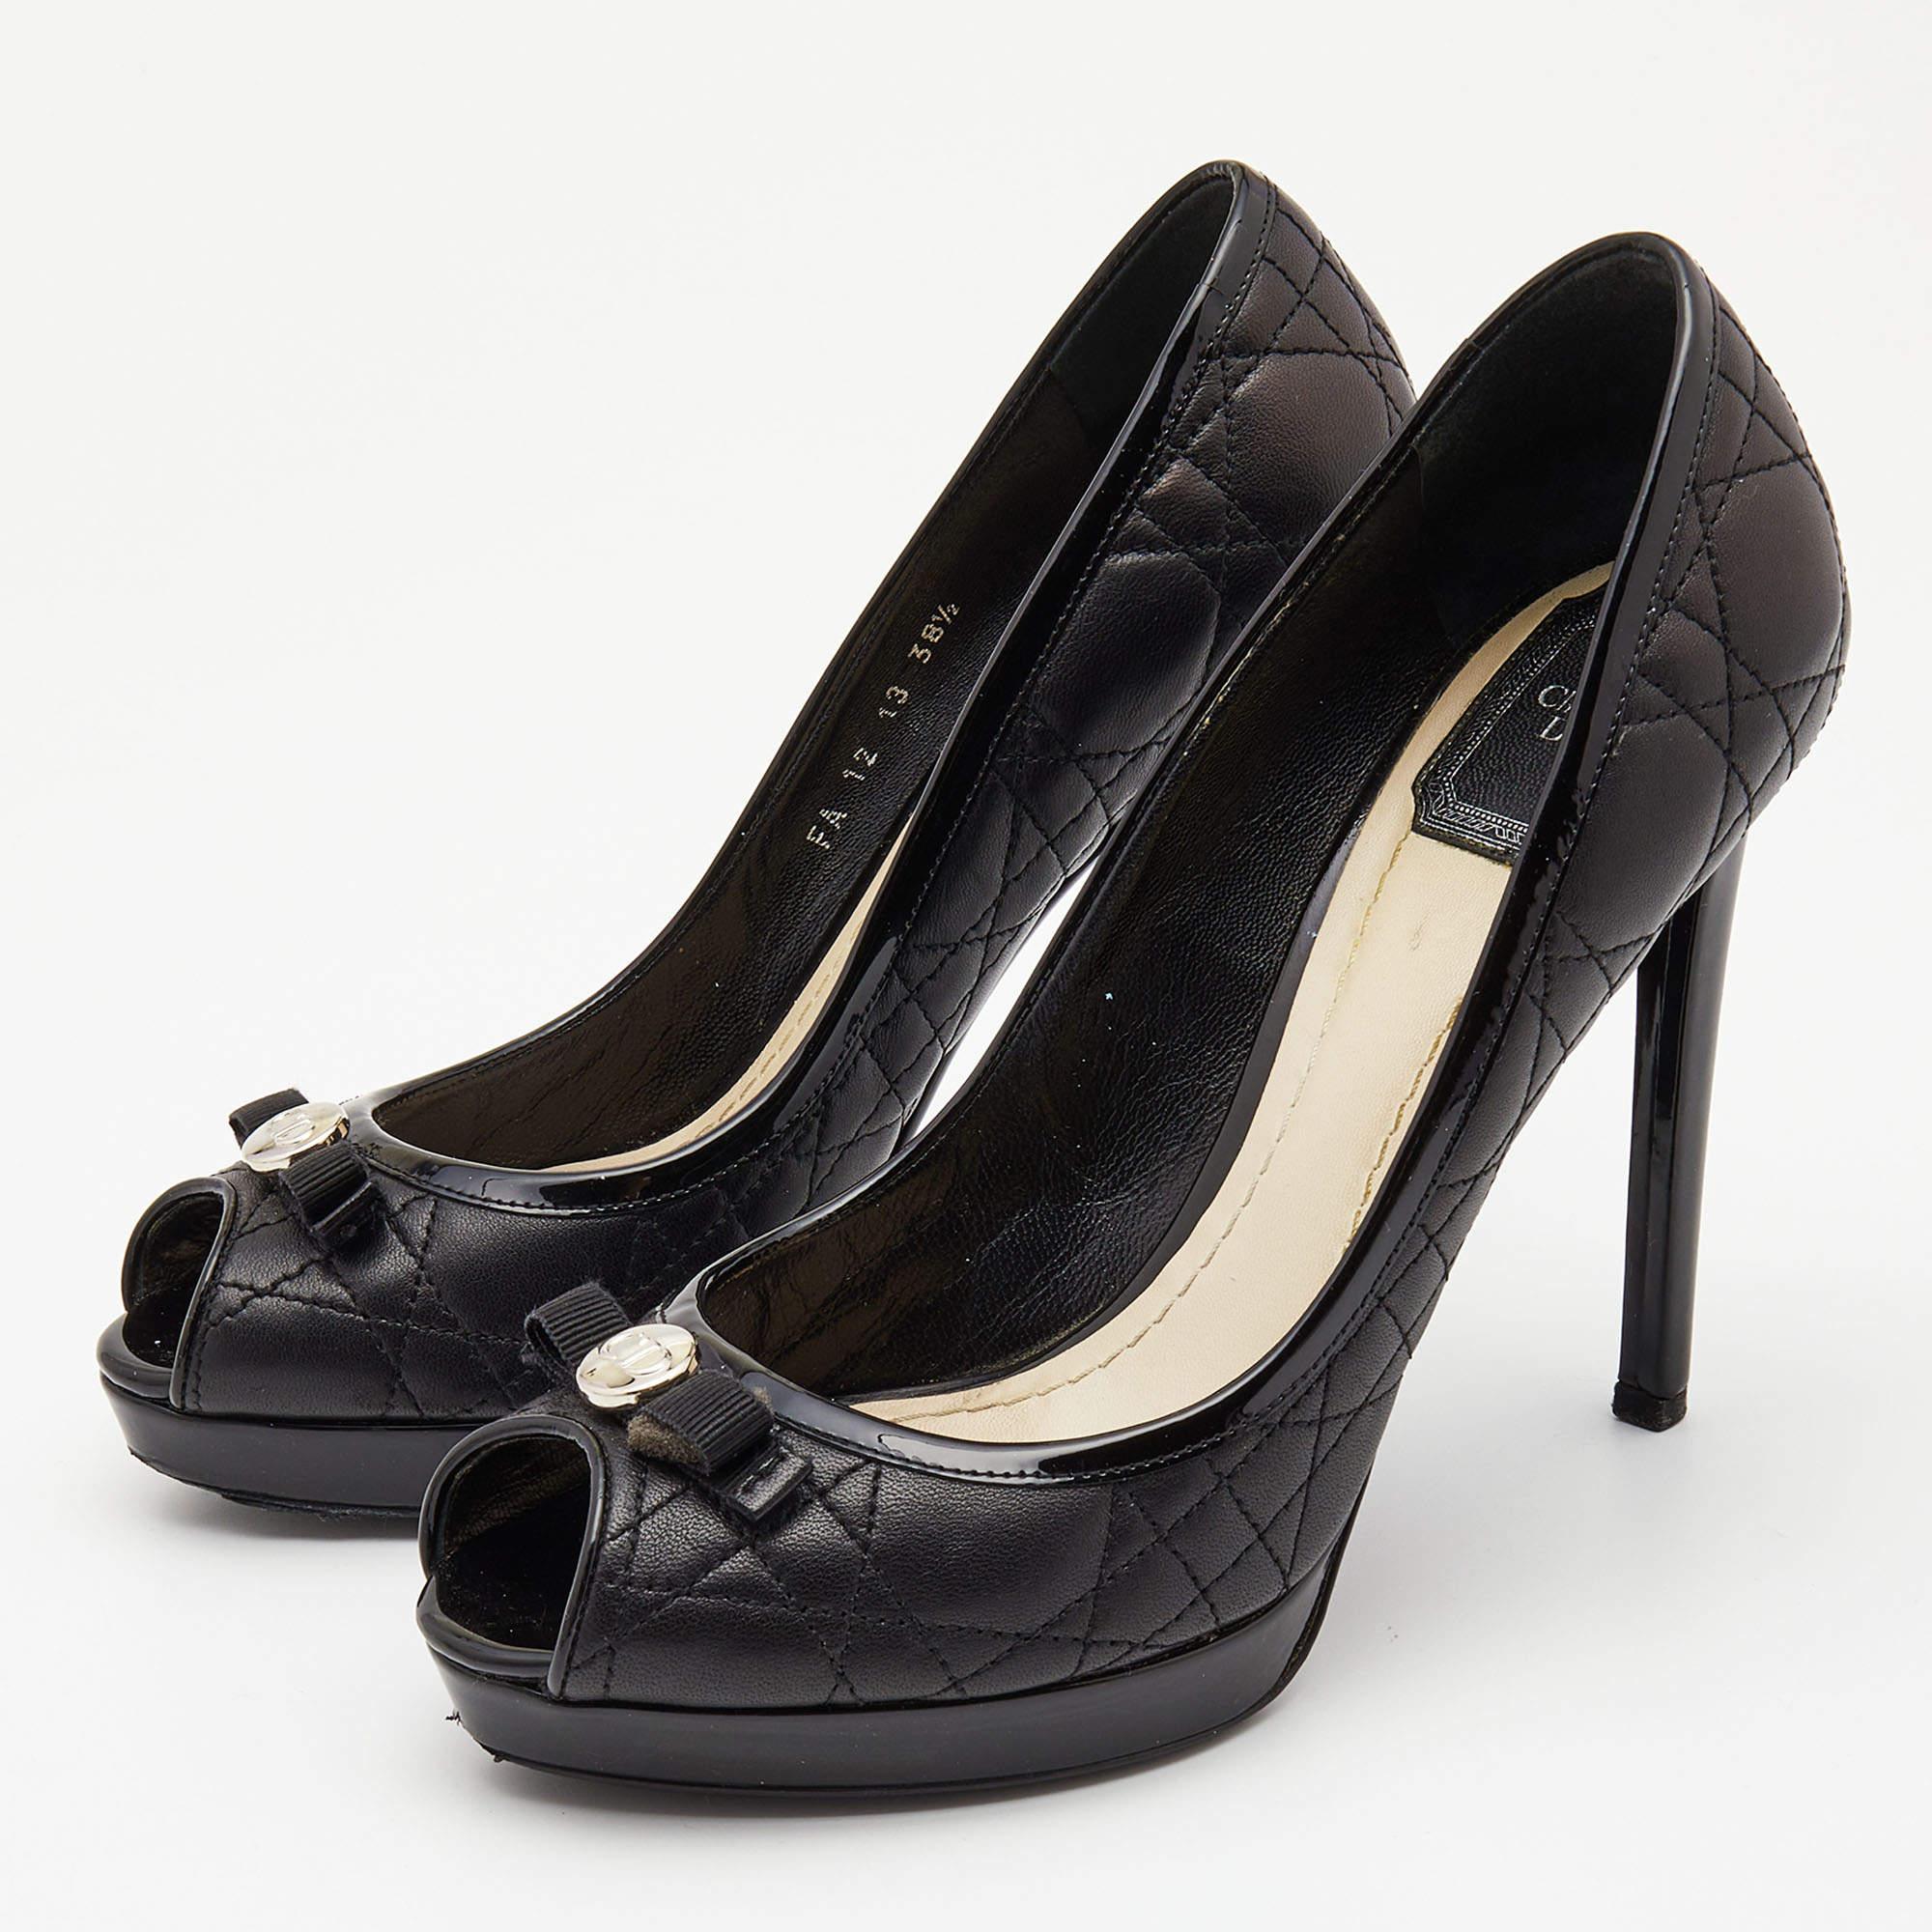 This pair of Christian Dior pumps is more than just a basic fashion statement. Crafted from Cannage quilted leather and patent leather, they feature peep toes and 'CD' logo detailed bows on the uppers. Set on 13cm heels and thin platforms, you are